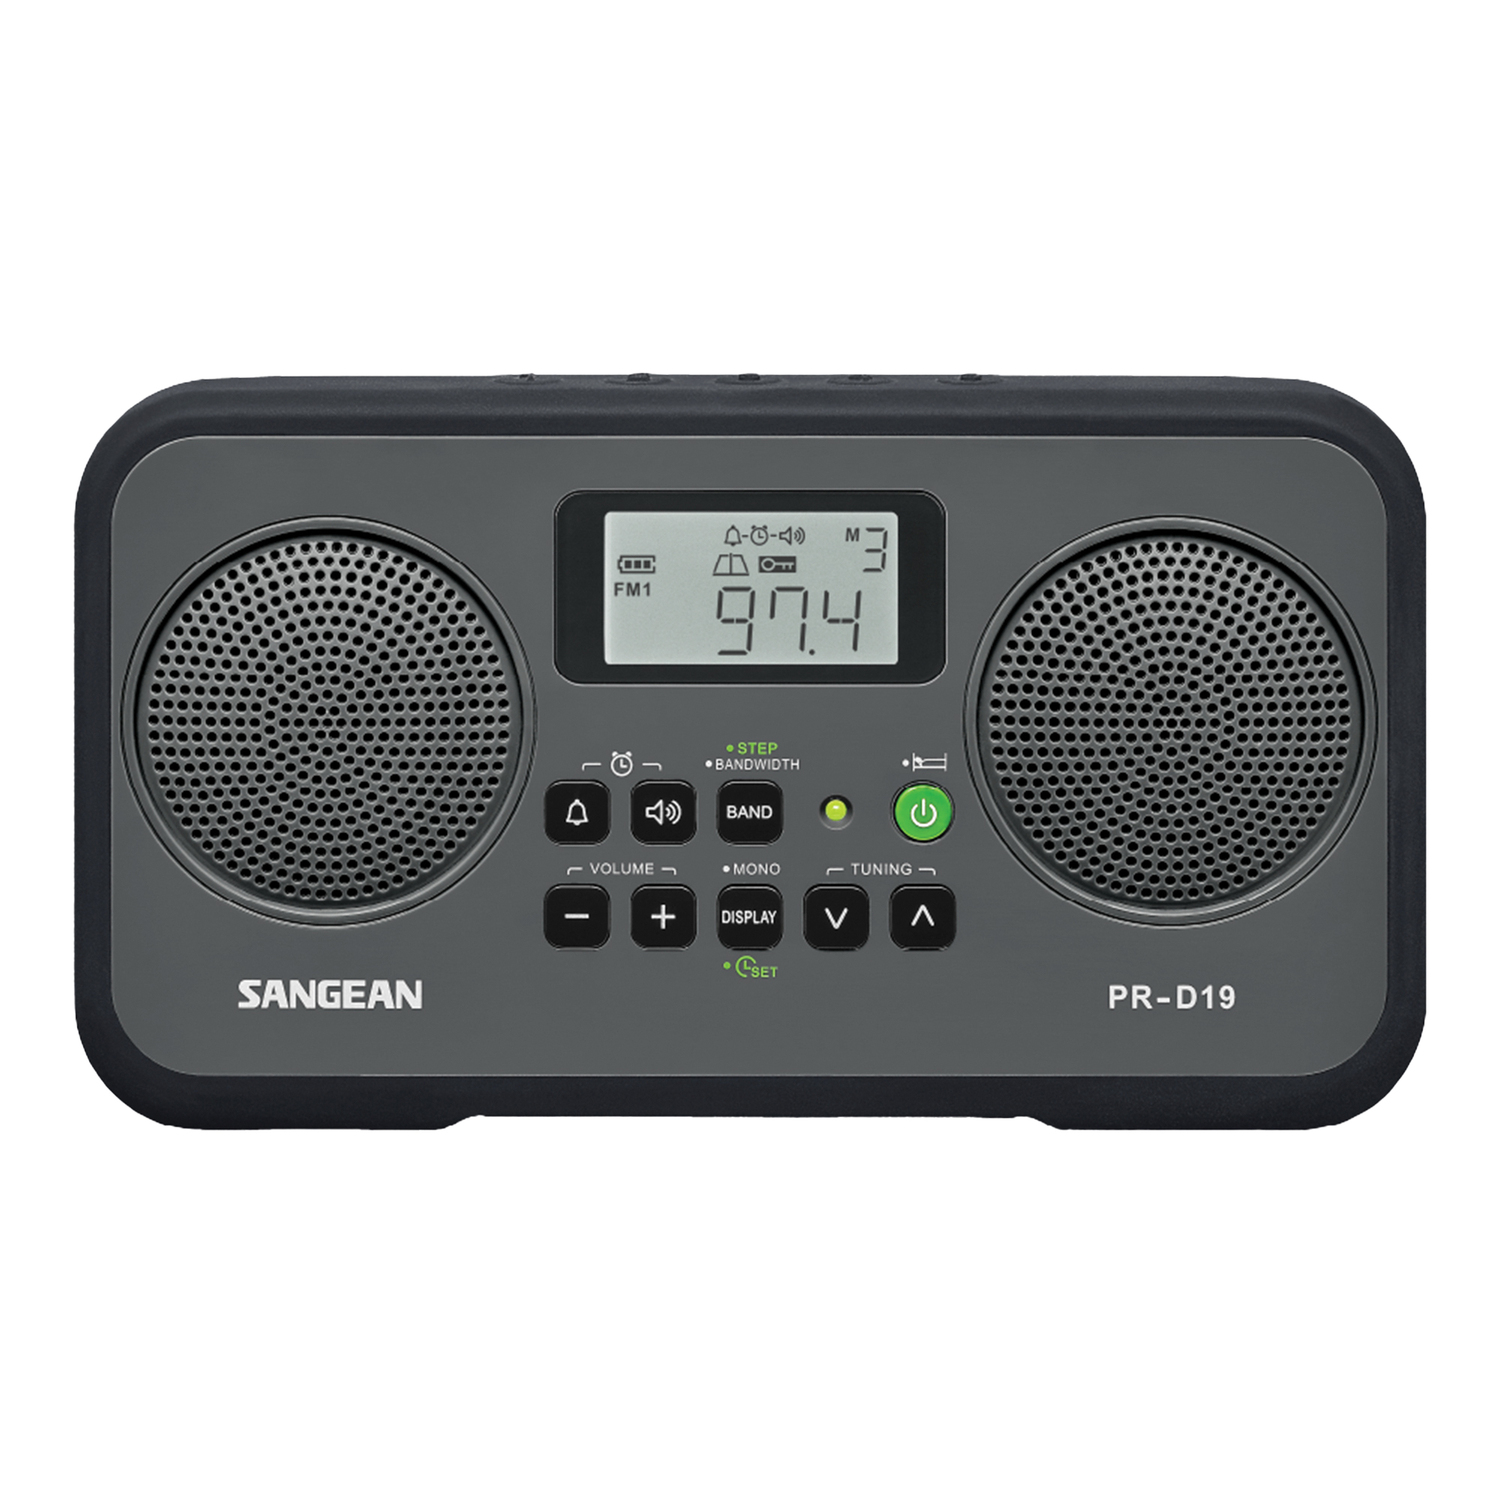 Sangean PR-D19BK FM Stereo/AM Digital Tuning Portable Radio with Protective Bumper (Gray/Black) - image 1 of 6